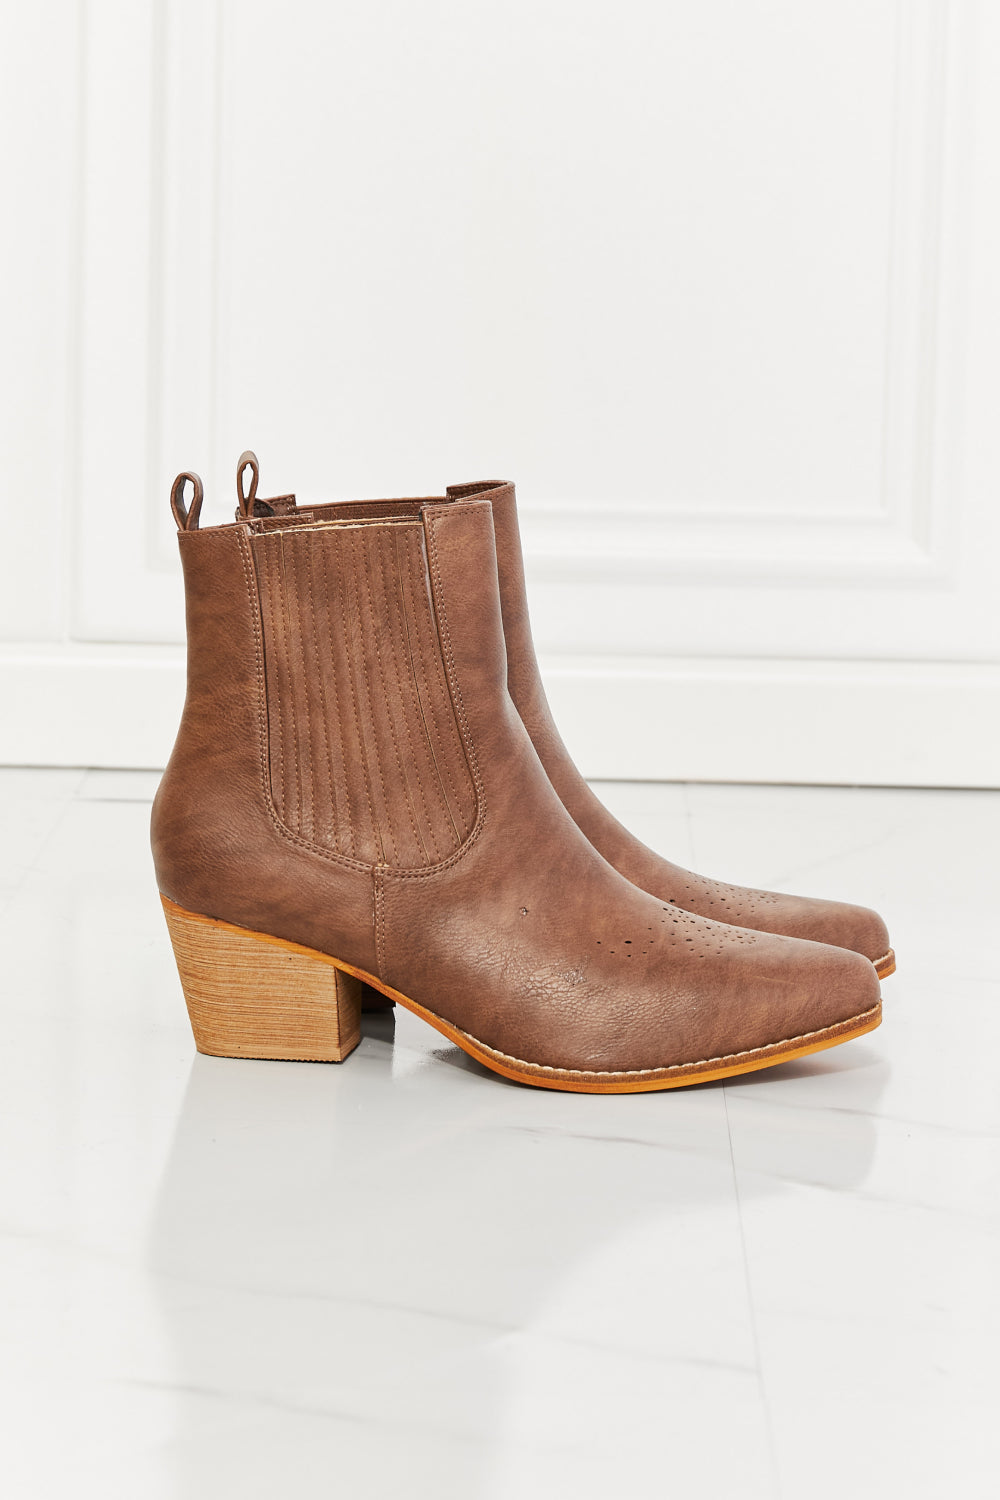 Stacked Heel Western Style Boots